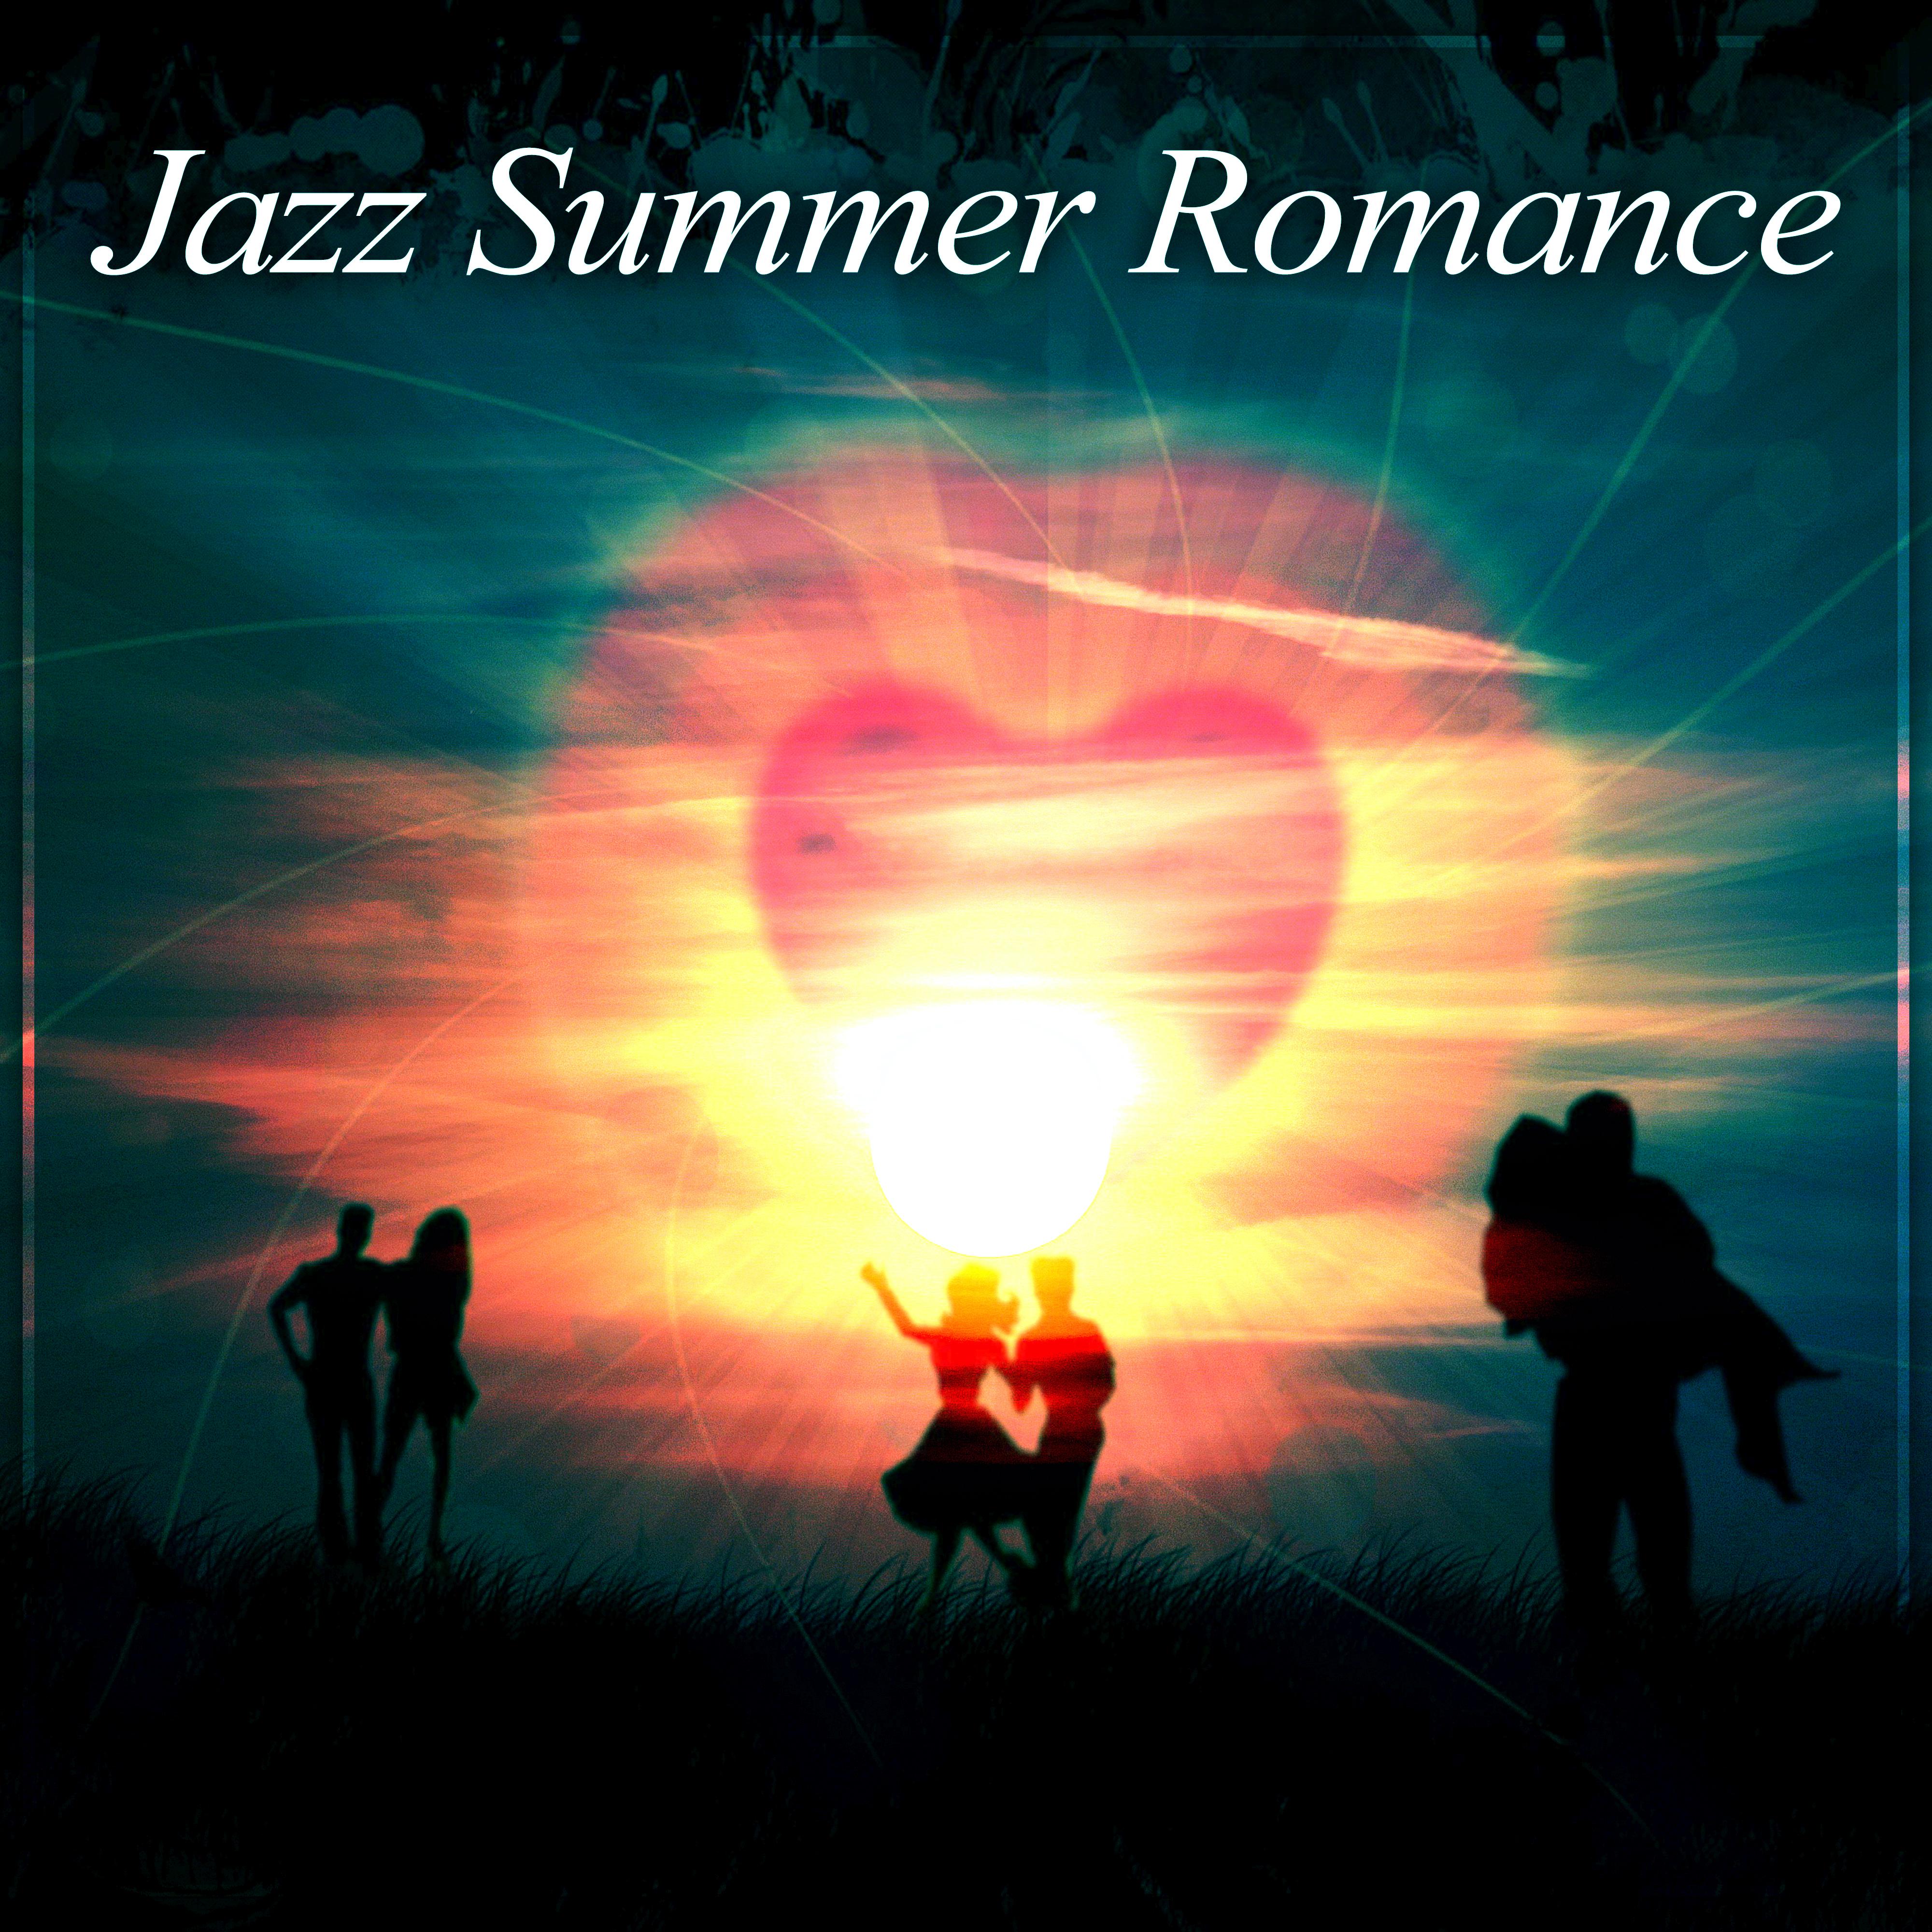 Jazz Summer Romance – Romantic Saxophone Music for Summer Evening, Erotic Music for Intimate Moments